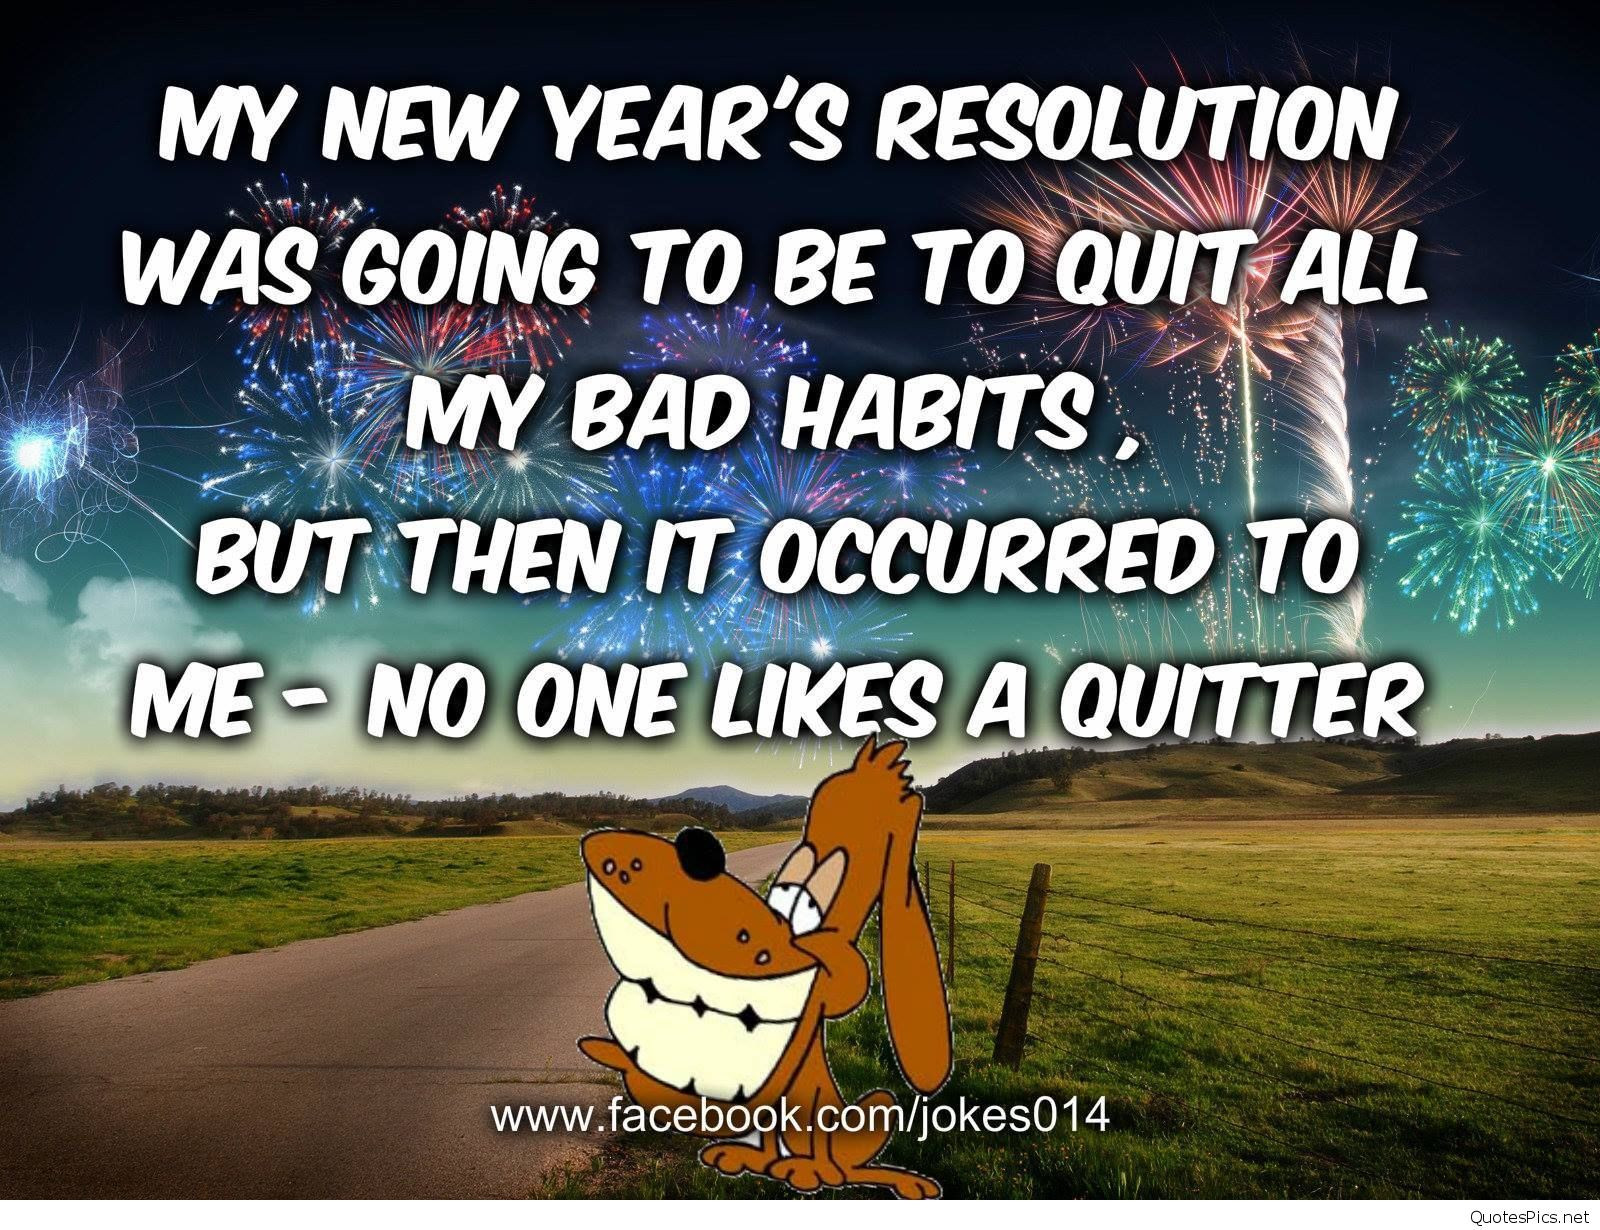 Funny New Years Eve Quotes
 Funny happy new year resolutions images & sayings cards 2017